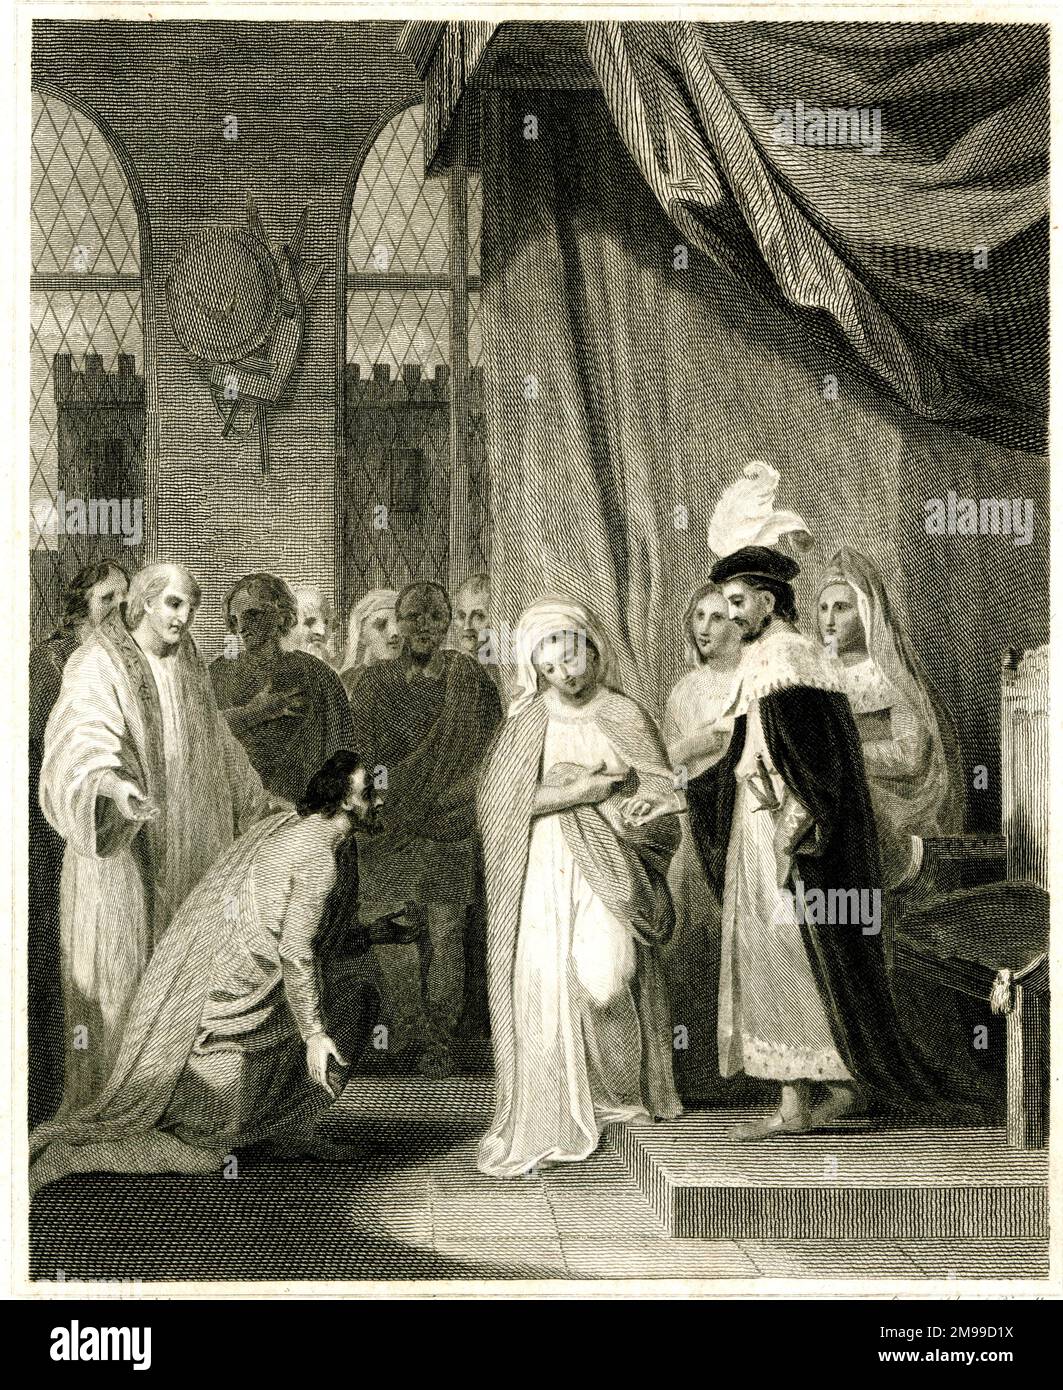 Robert the Bruce, King of Scots, presenting his sister Mary Bruce in marriage to Sir Neil Campbell, one of his loyal supporters. Stock Photo